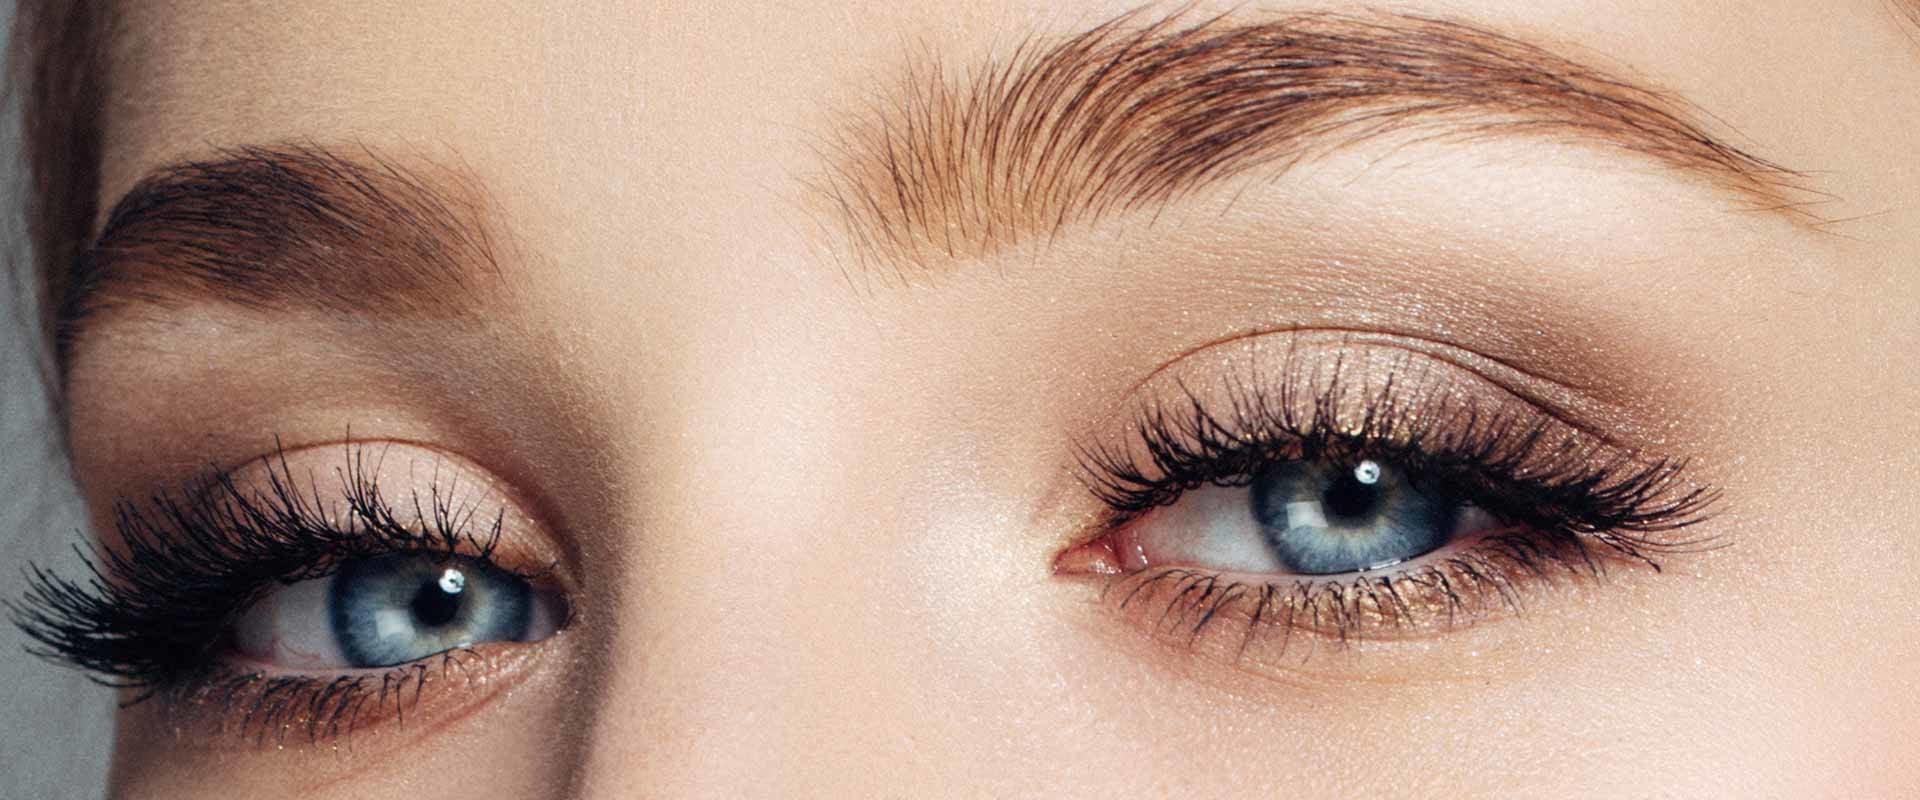 What are wispy lashes?